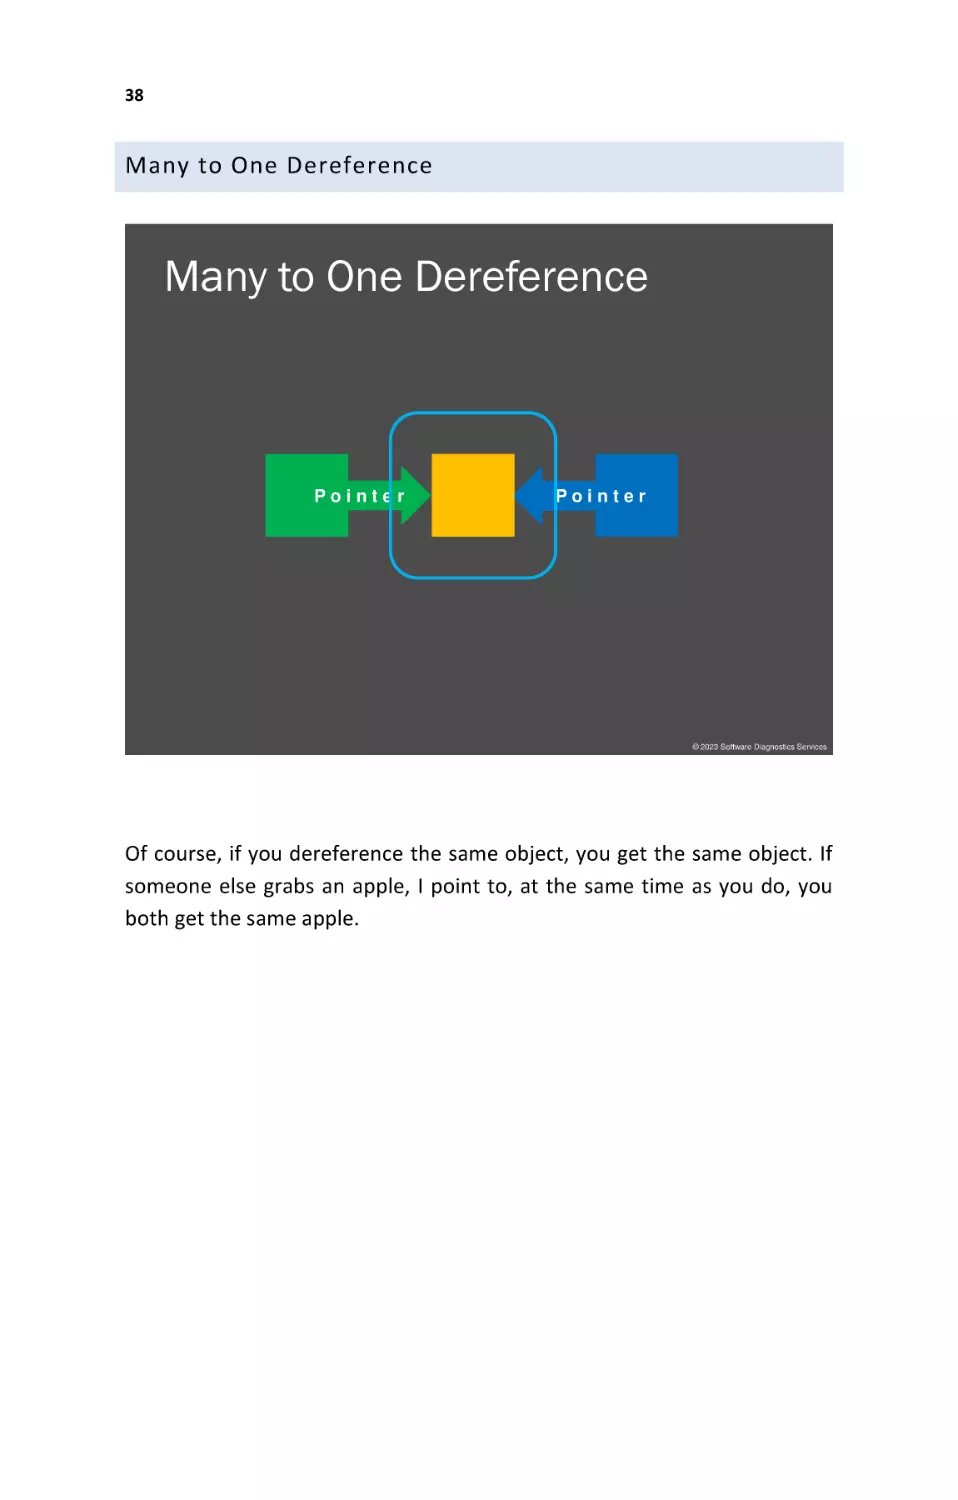 Many to One Dereference